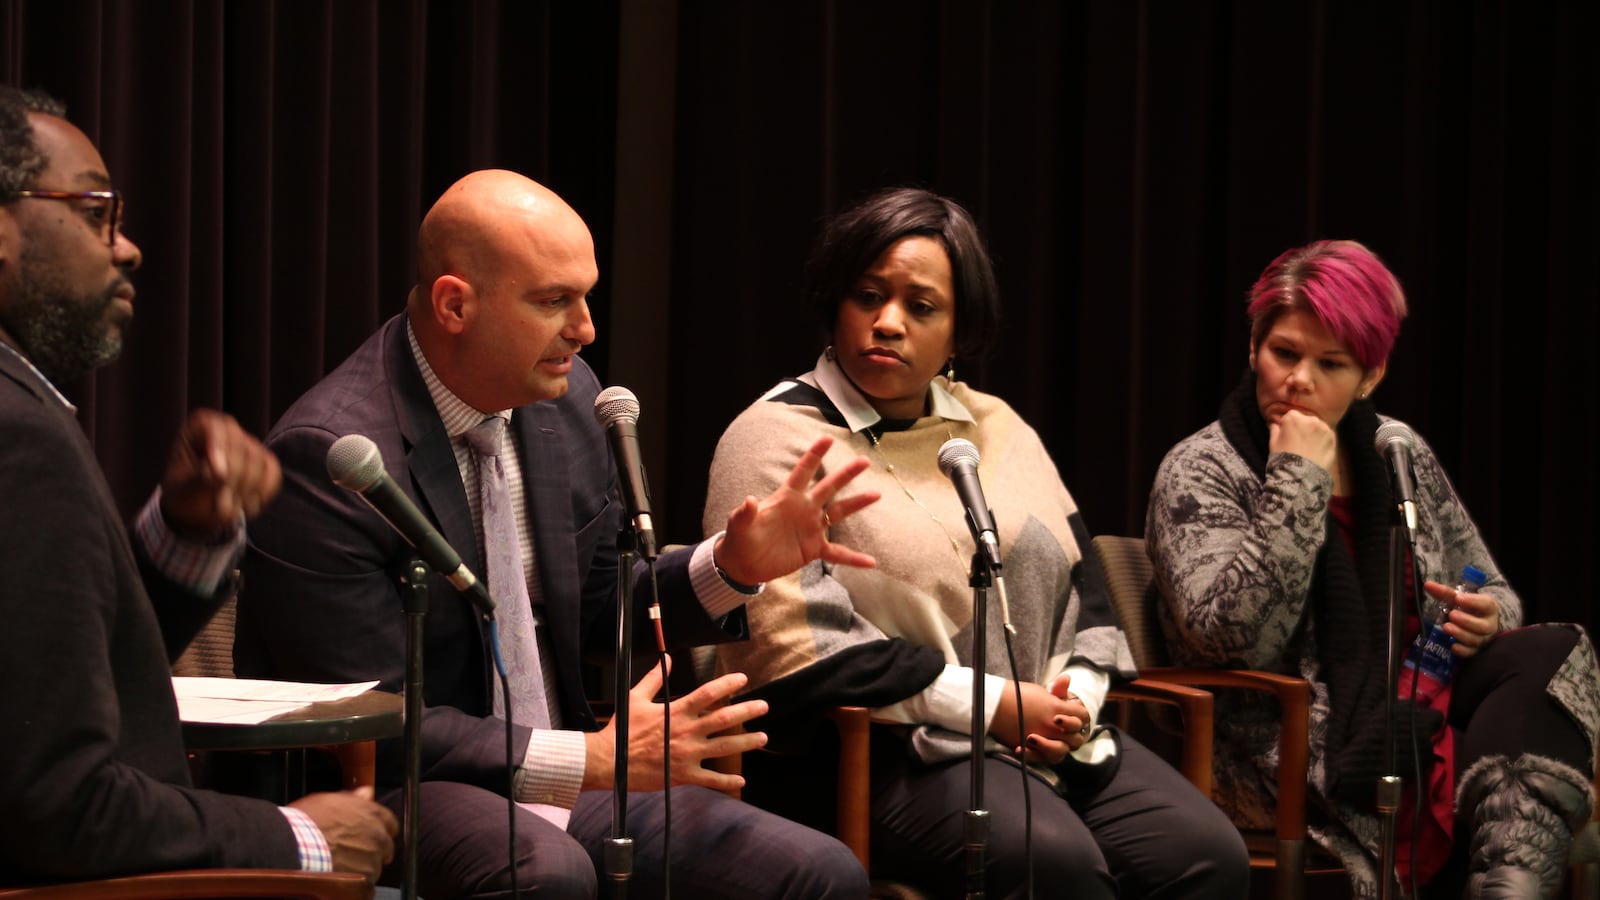 Detroit Superintendent Nikolai Vitti, second from left, says a tweak to school funding policy in Michigan would alleviate some of the effects of high student mobility. Looking on from left are moderator Stephen Henderson of WDET, Darienne Driver, CEO of United Way of Southeastern Michigan, and Maria Montoya, who works in the charter school office of Grand Valley State University.